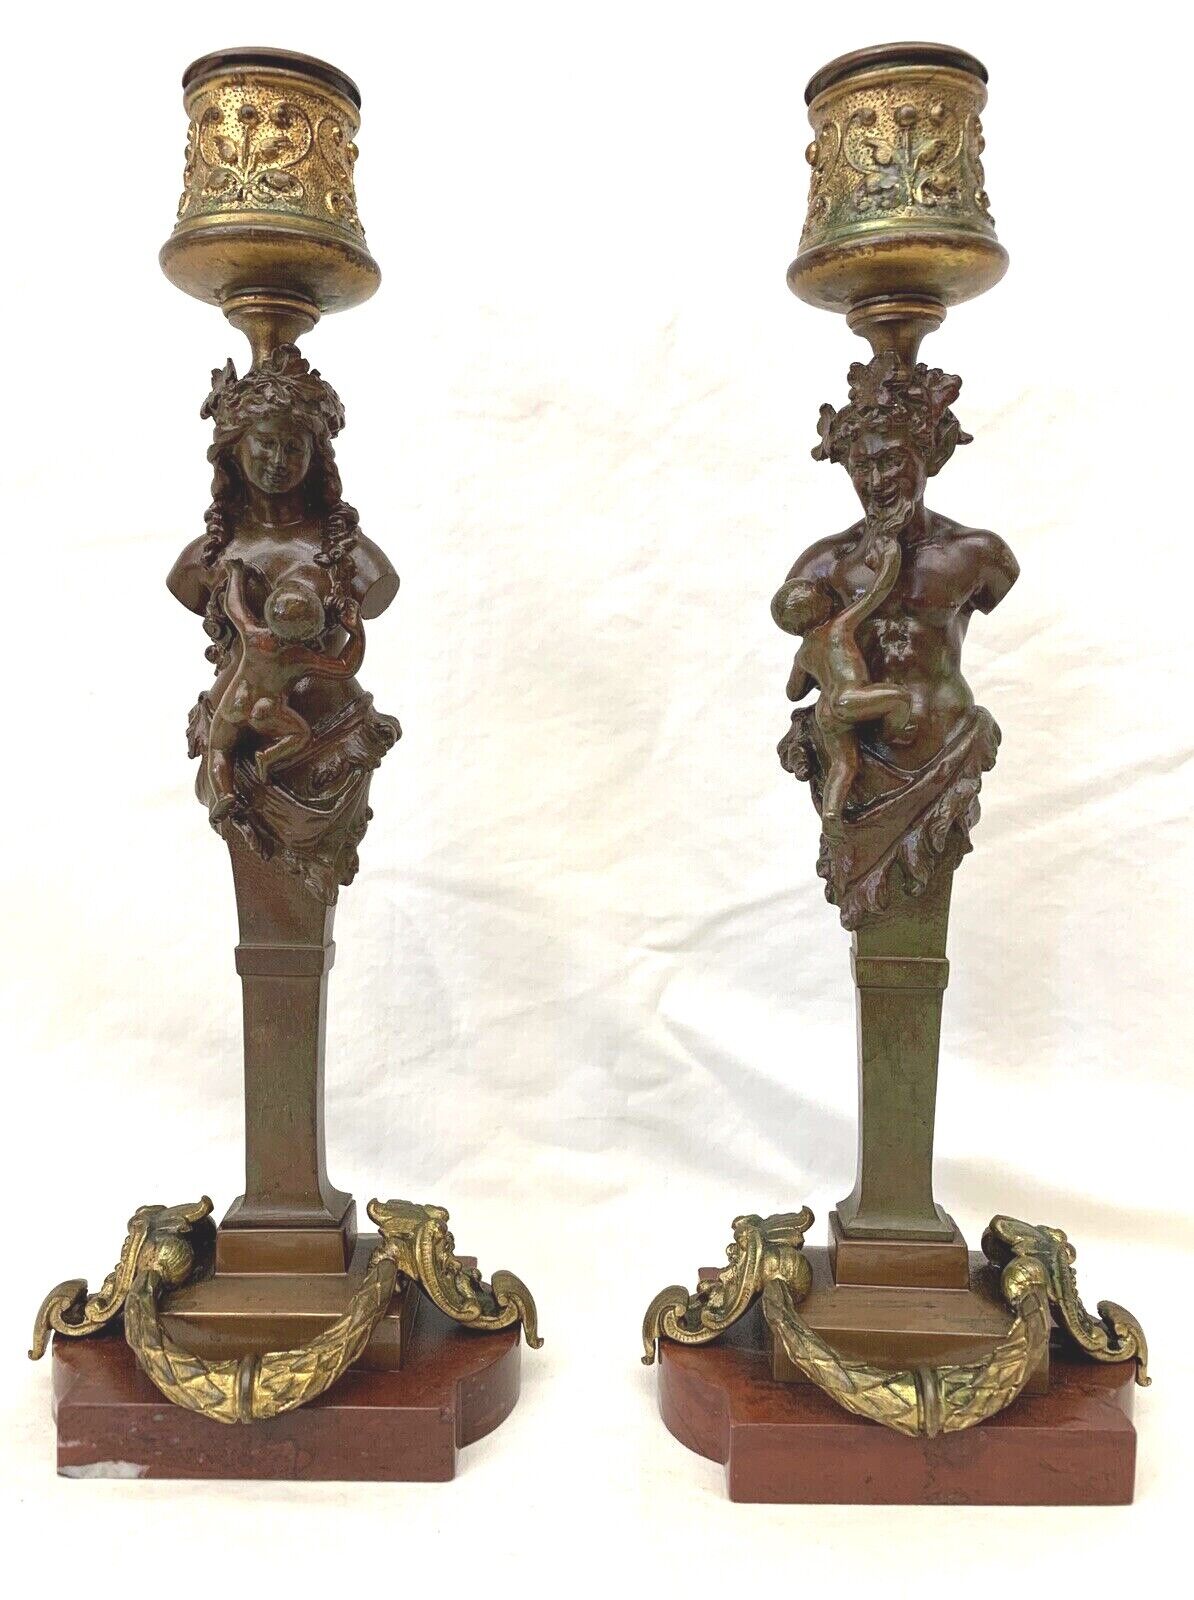 AN IMPORTANT CIRCA 1800 PAIR OF FRENCH BRONZE ON MARBLE FIGURINE CANDLESTICKS 